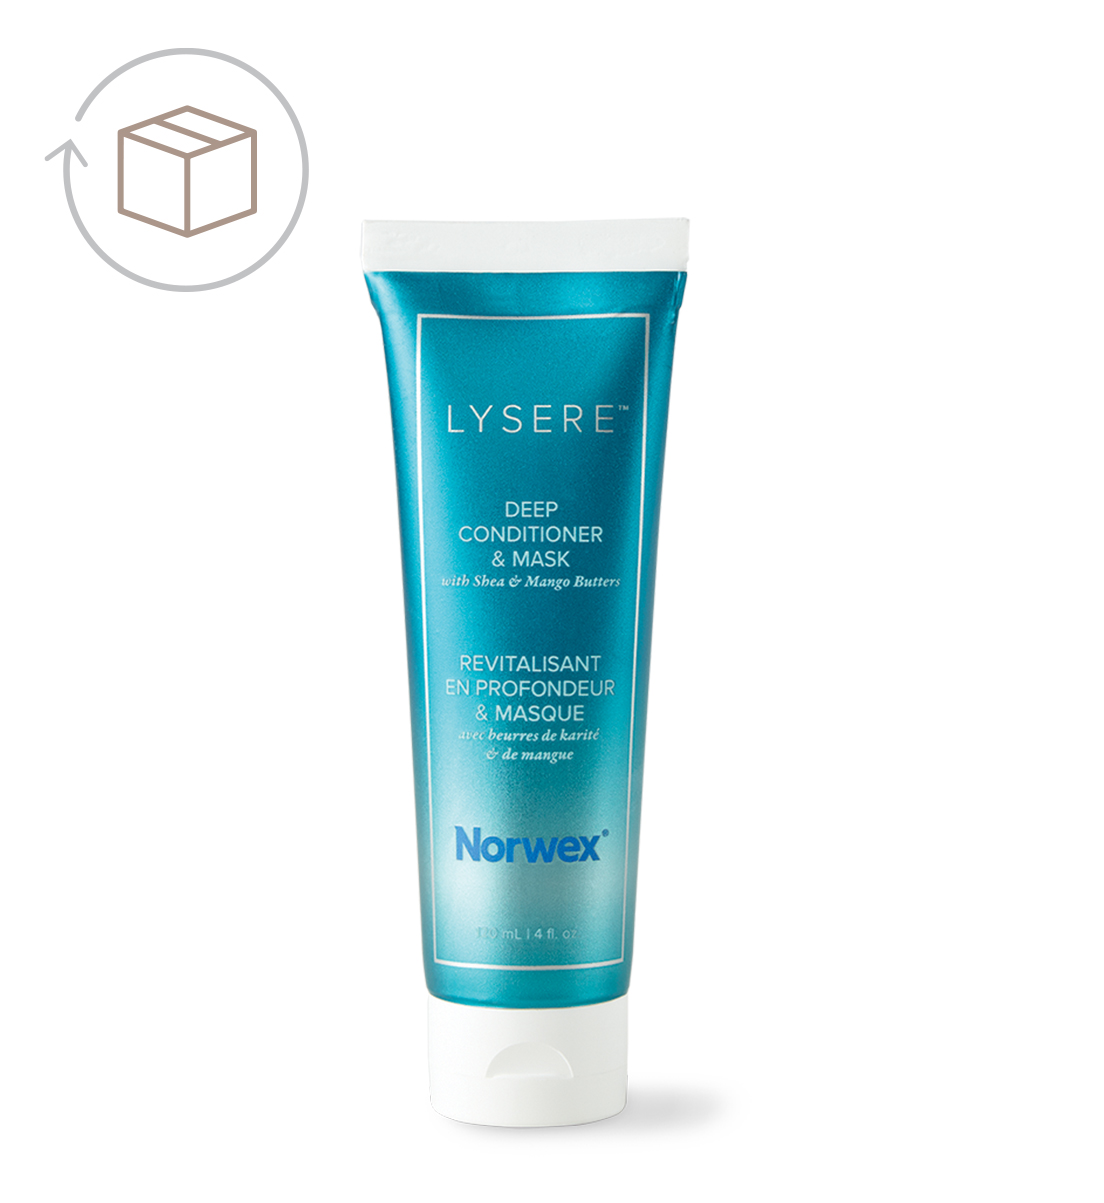 Lysere Deep Conditioner & Mask